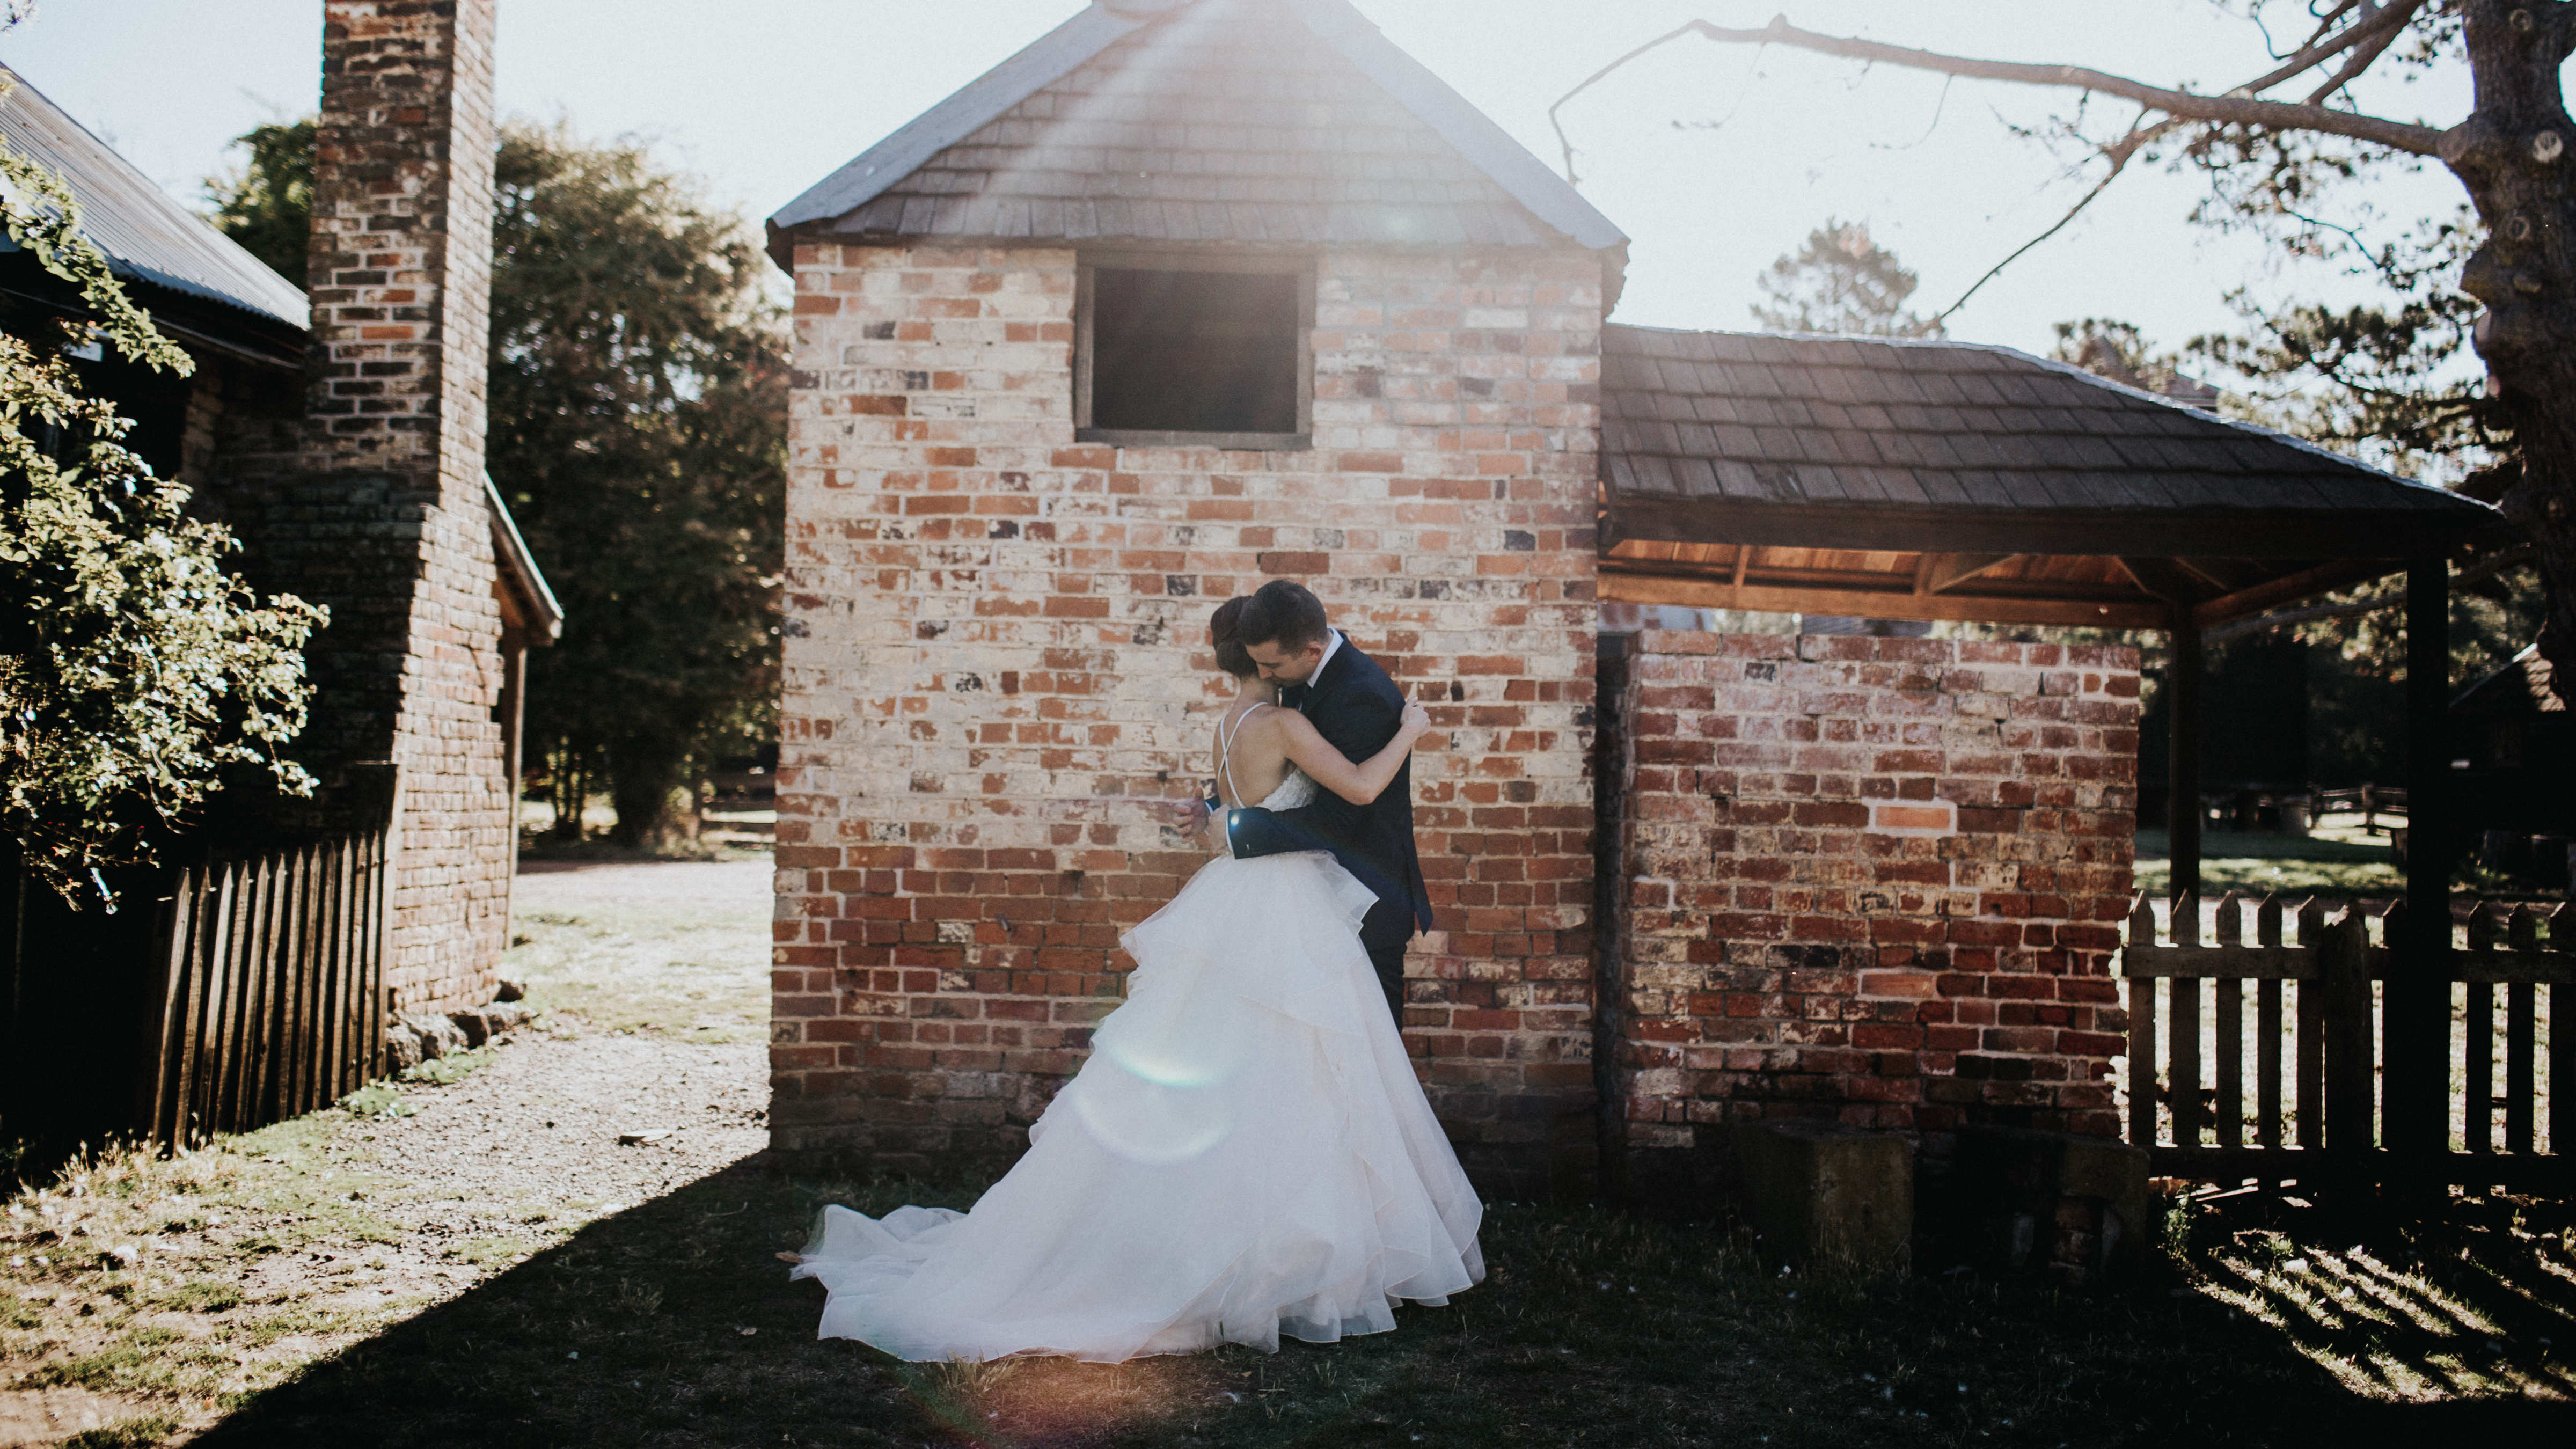 A bride and groom hug in front of the colourful bricks of the smoke house. The William Archer cottage and its brick chimney is to the left of the photo. Photo: Cassie Sullivan.